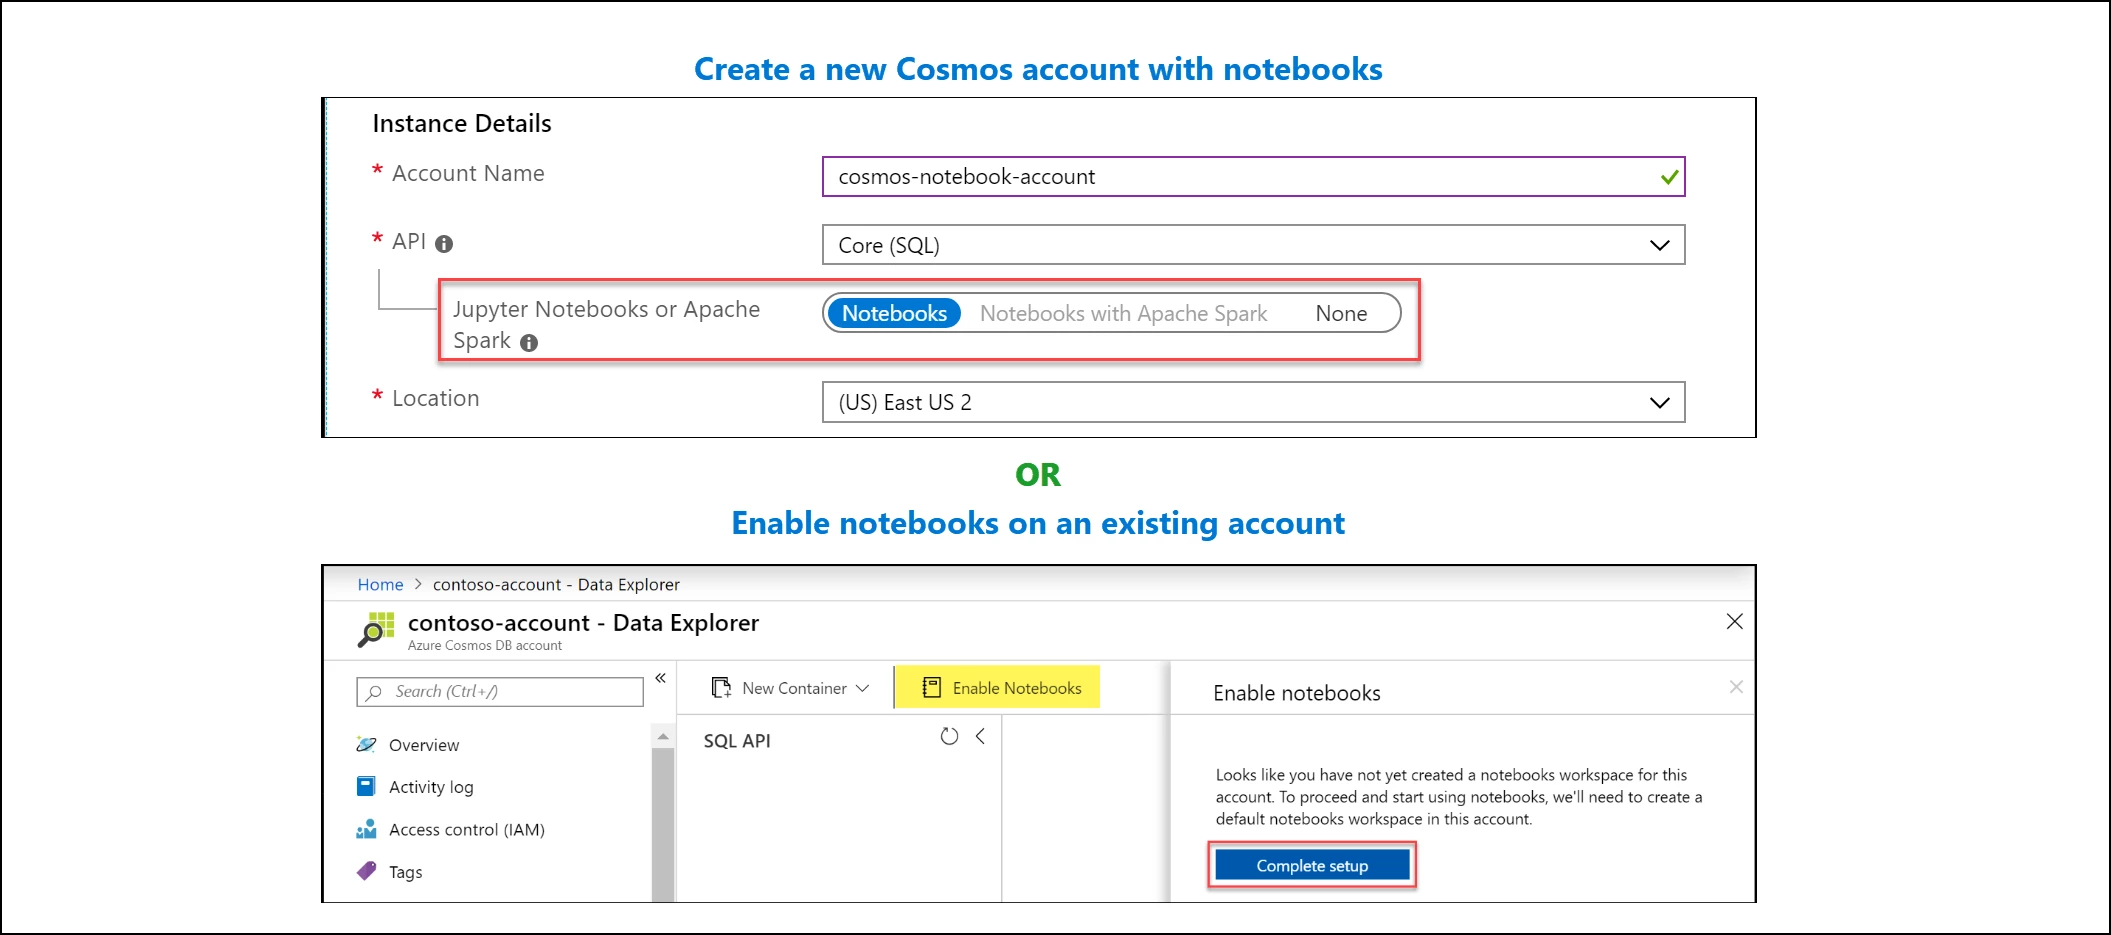 Create account with notebooks or enable notebooks on existing account in Azure portal.